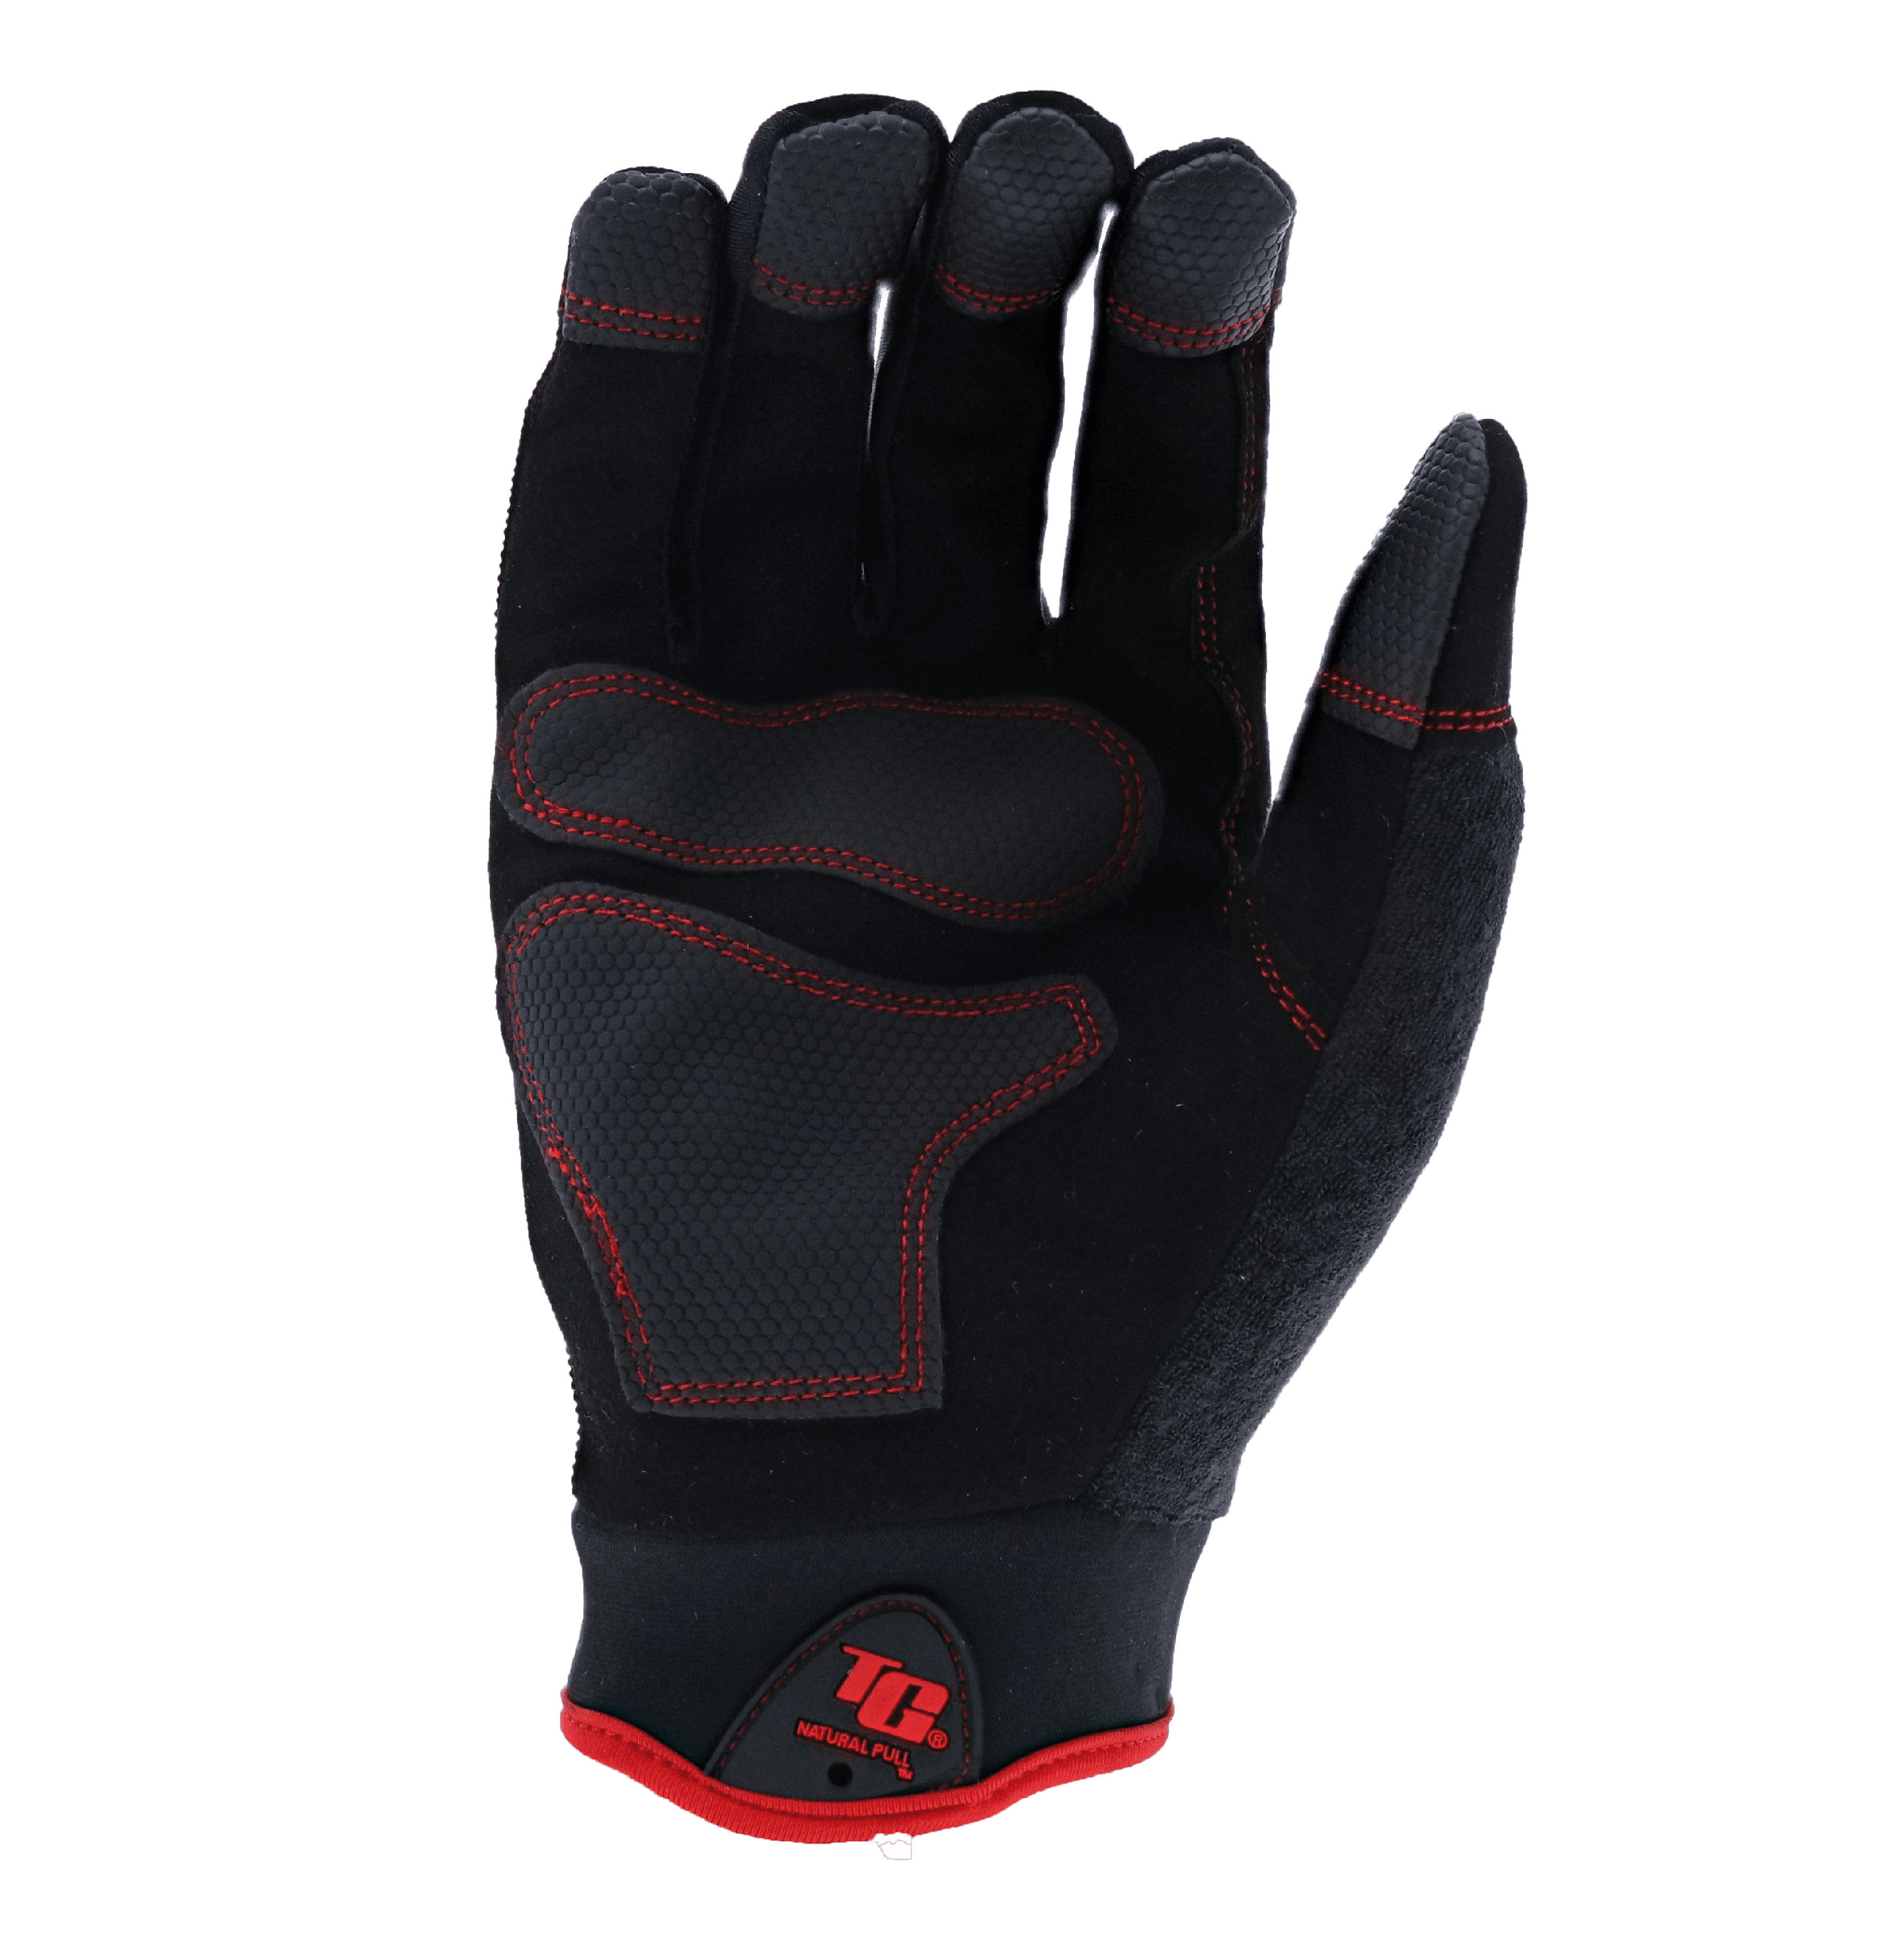 True Grip Safety Max Work Gloves With Touchscreen Fingers –